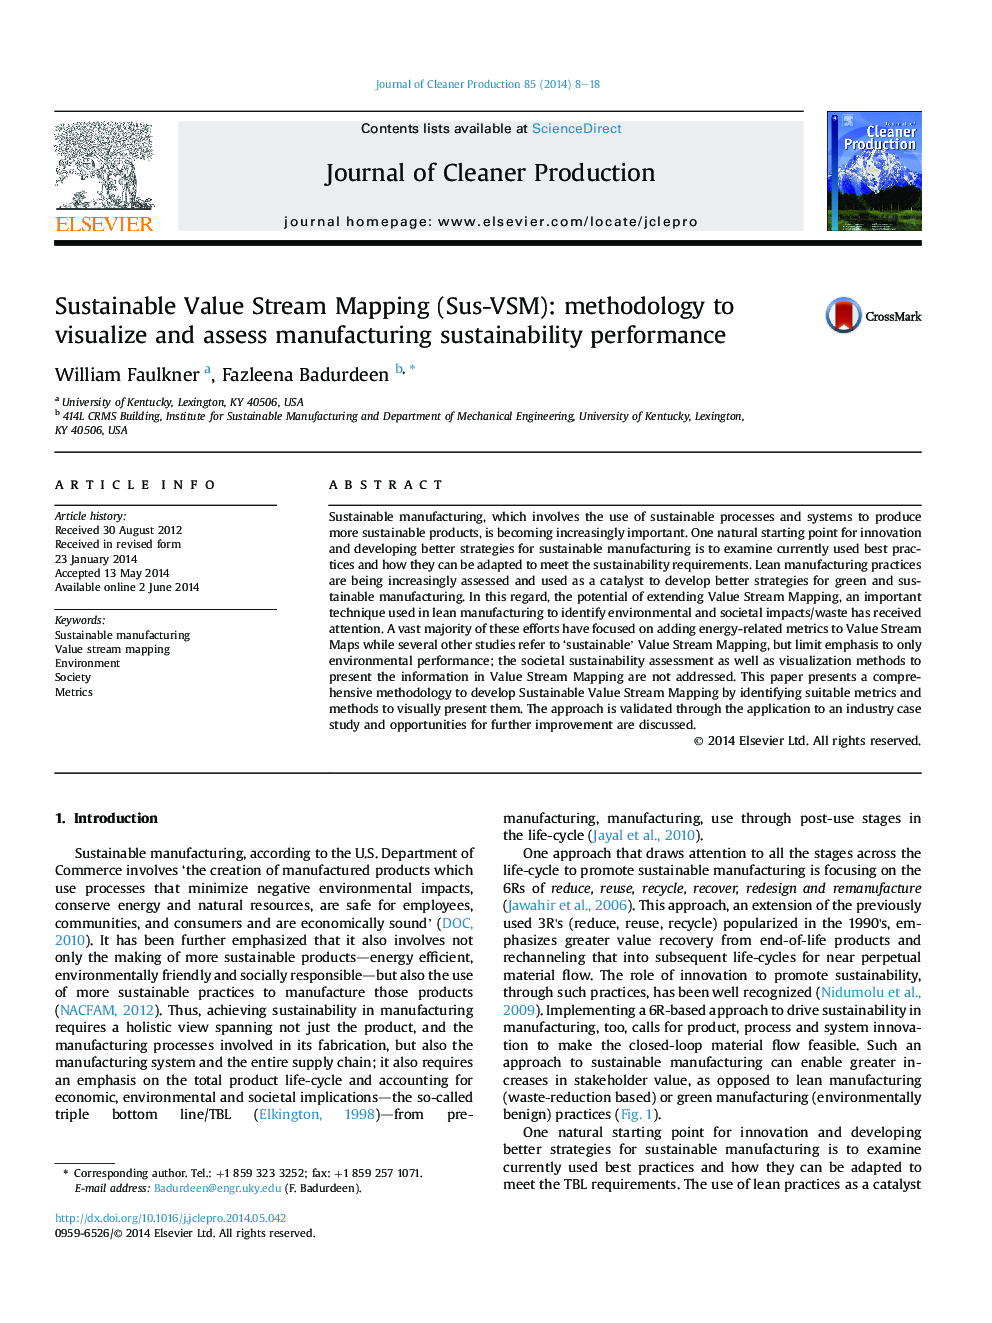 Sustainable Value Stream Mapping (Sus-VSM): methodology to visualize and assess manufacturing sustainability performance